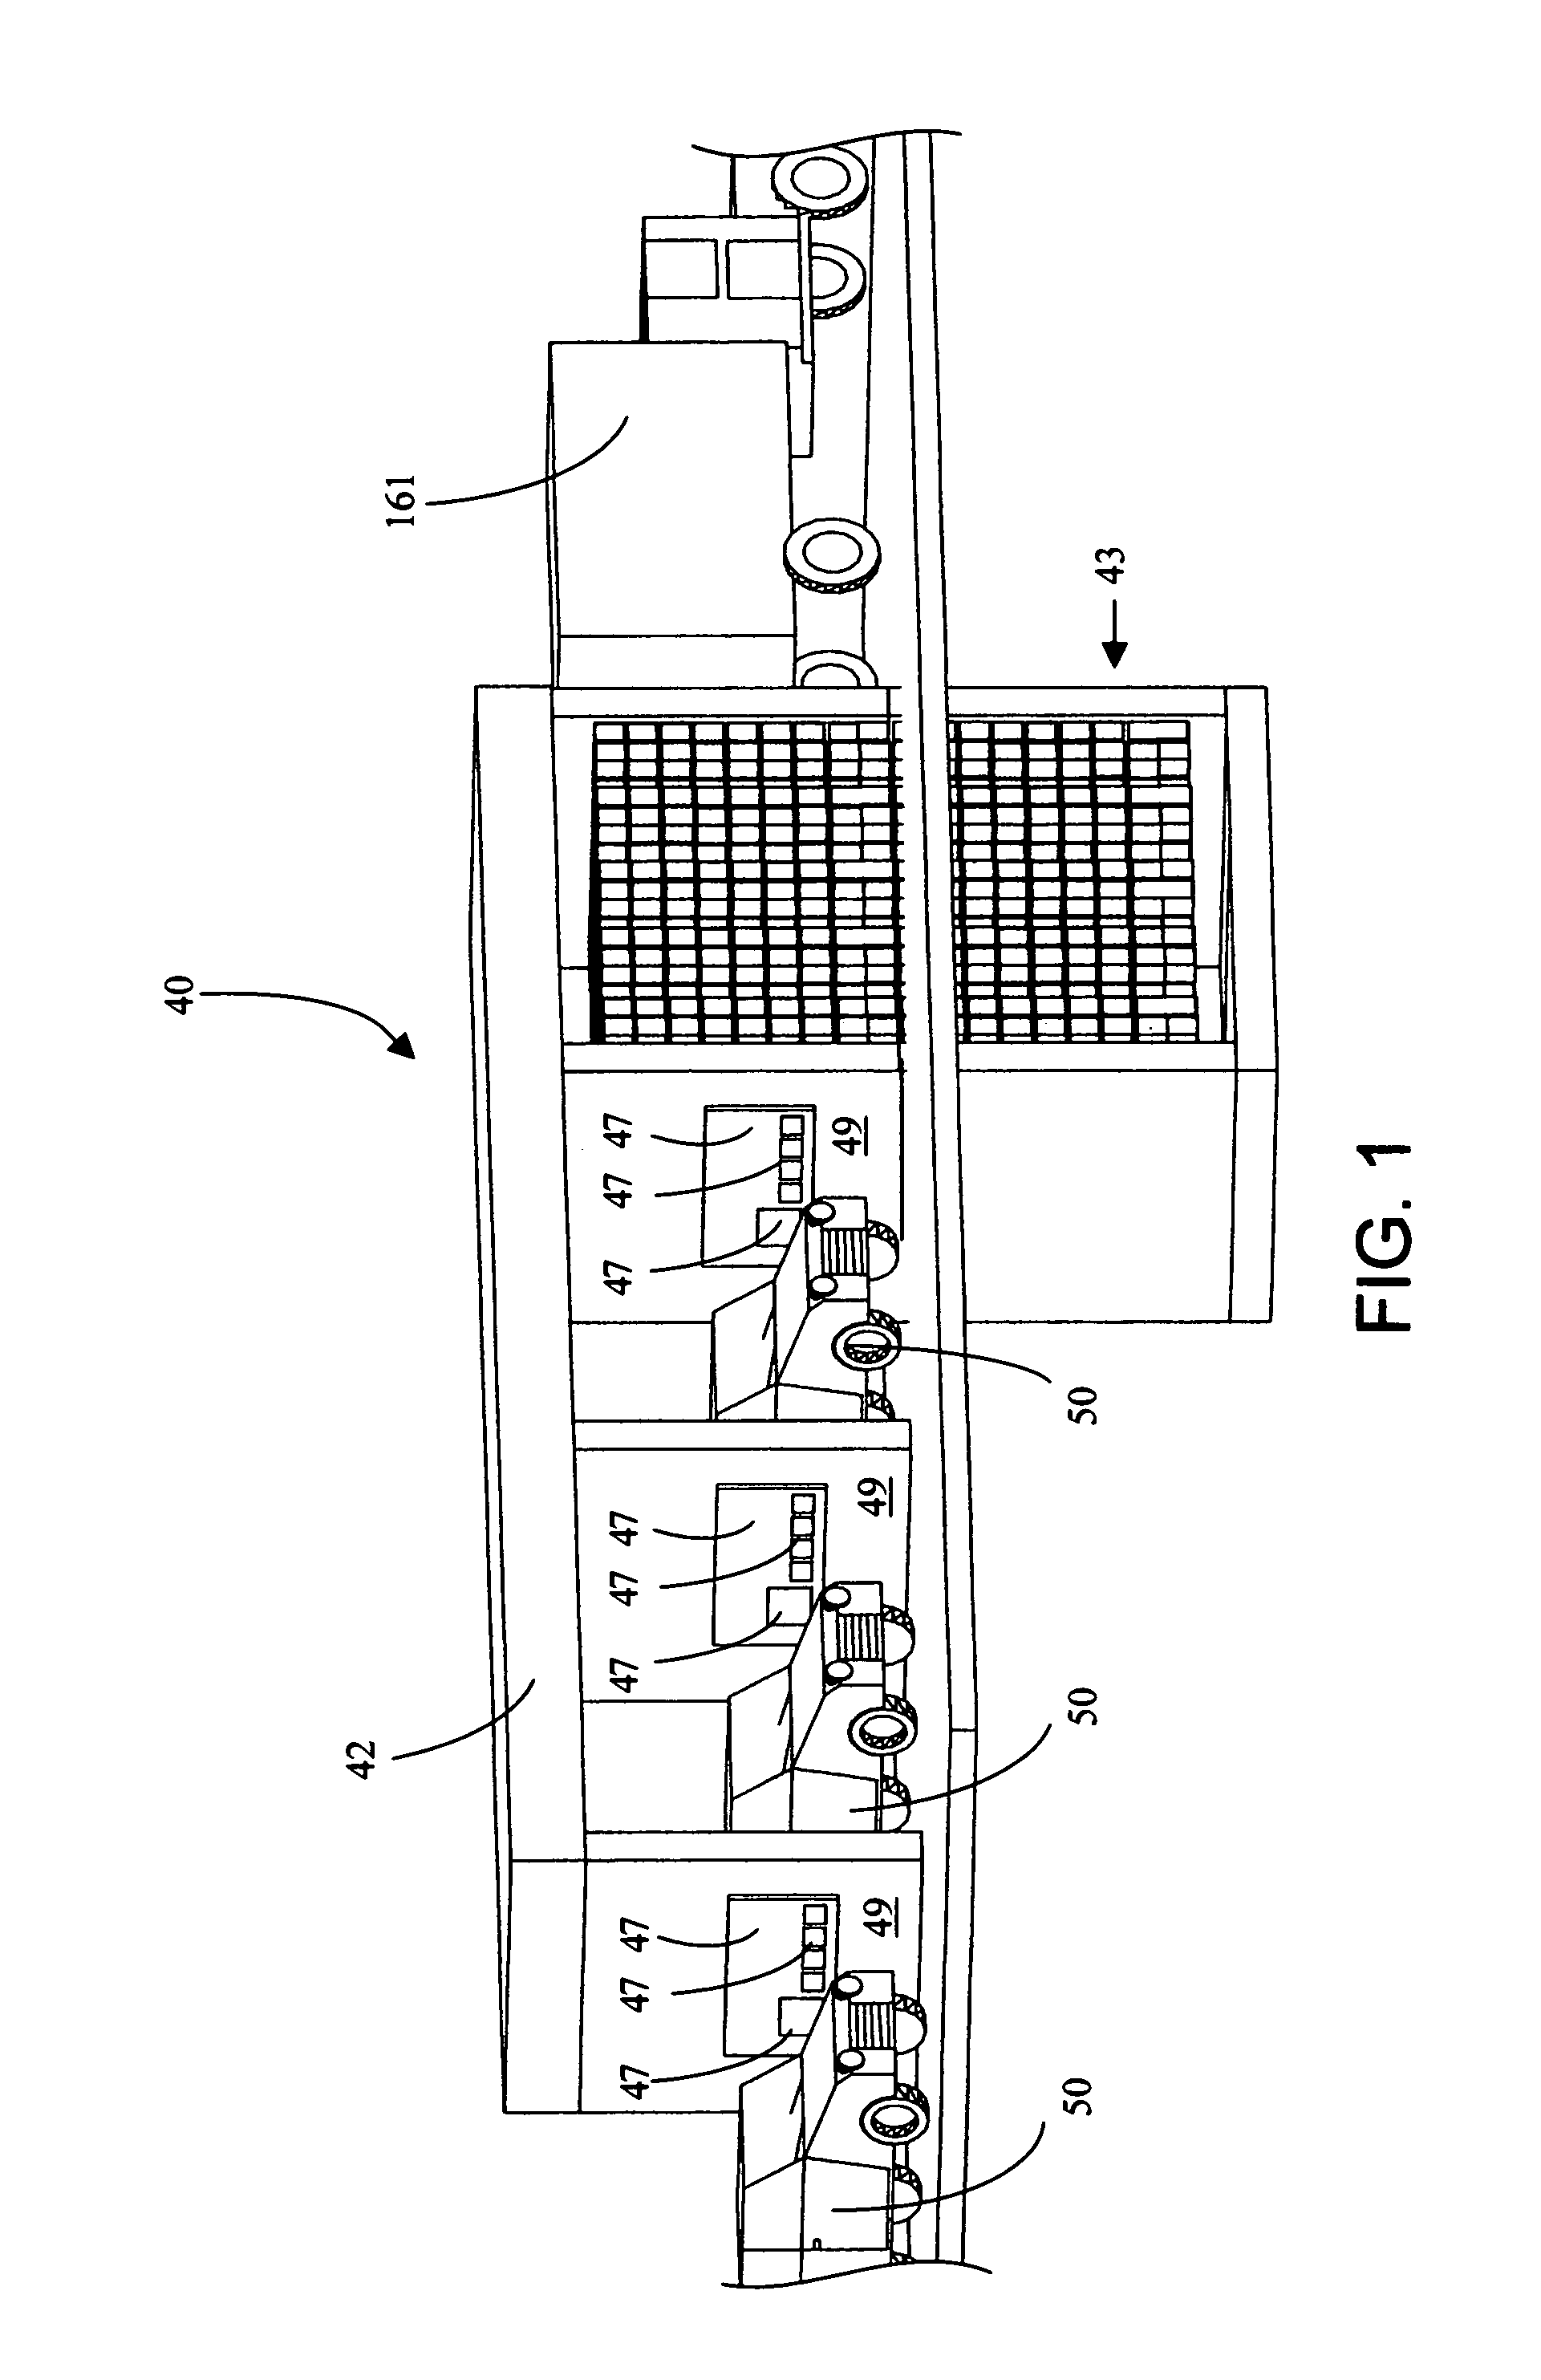 Automated 3-dimensional multitasking, stocking, storage, and distribution system